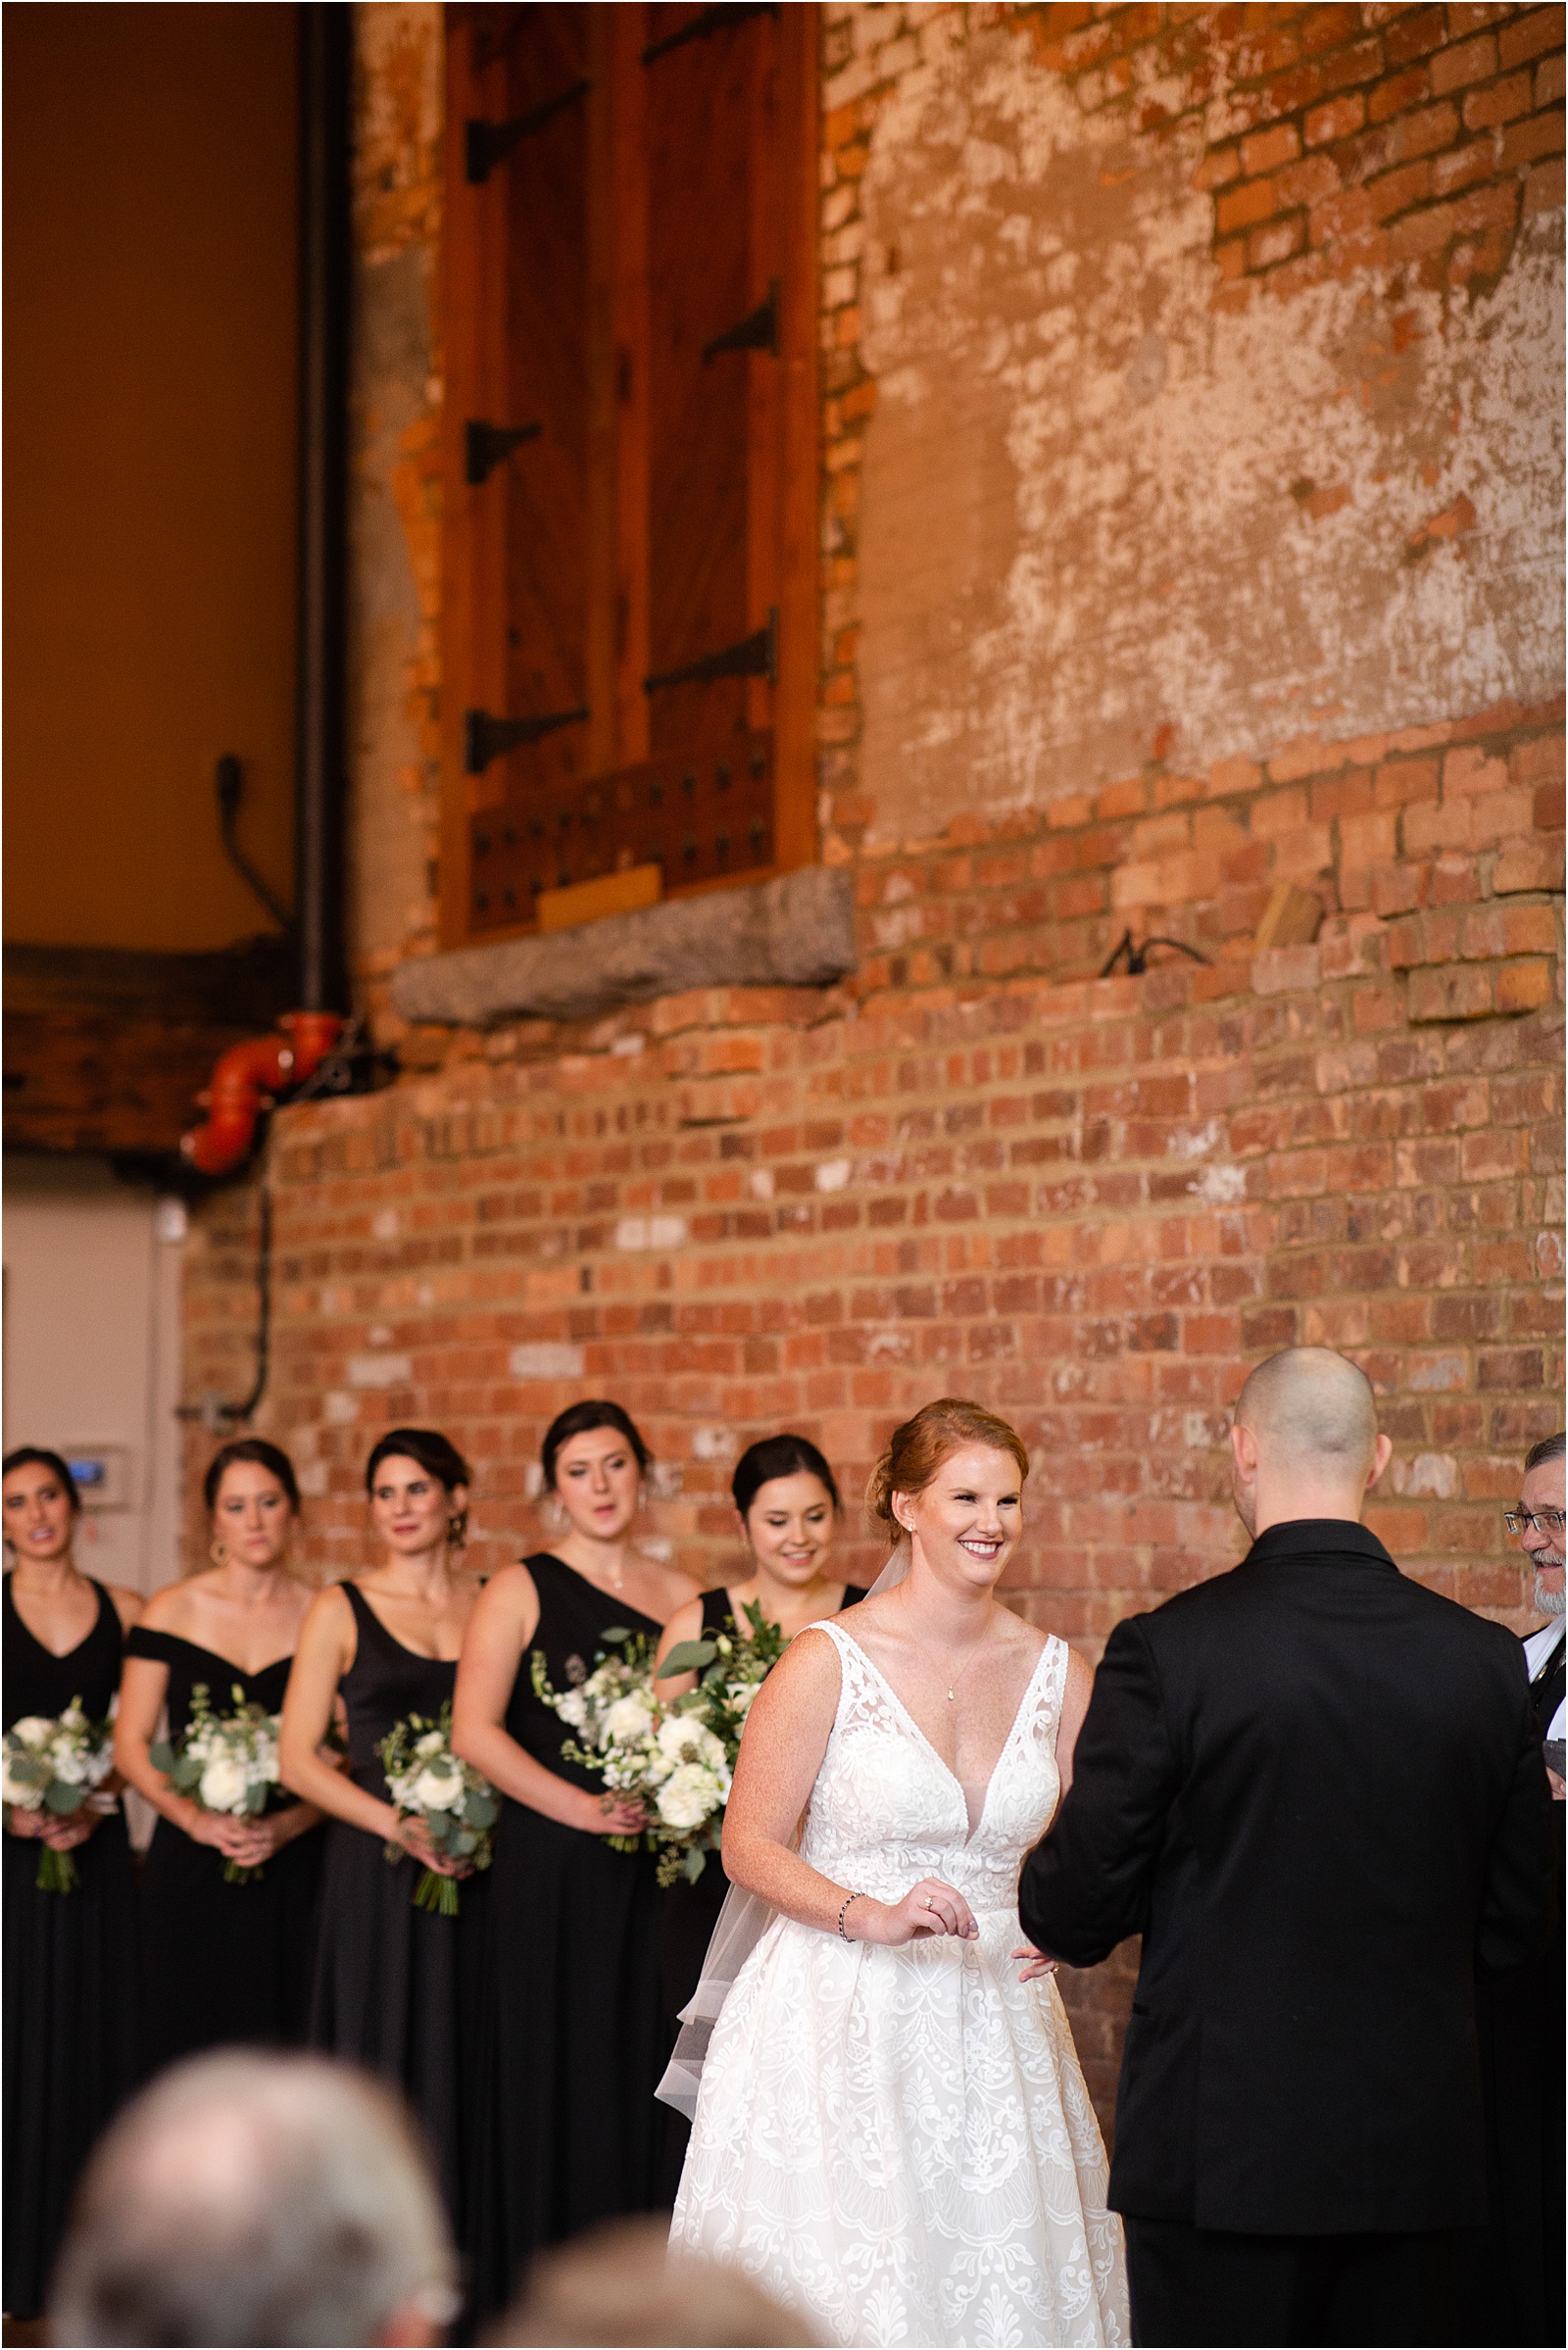 bride and bridal party during wedding ceremony at old cigar warehouse